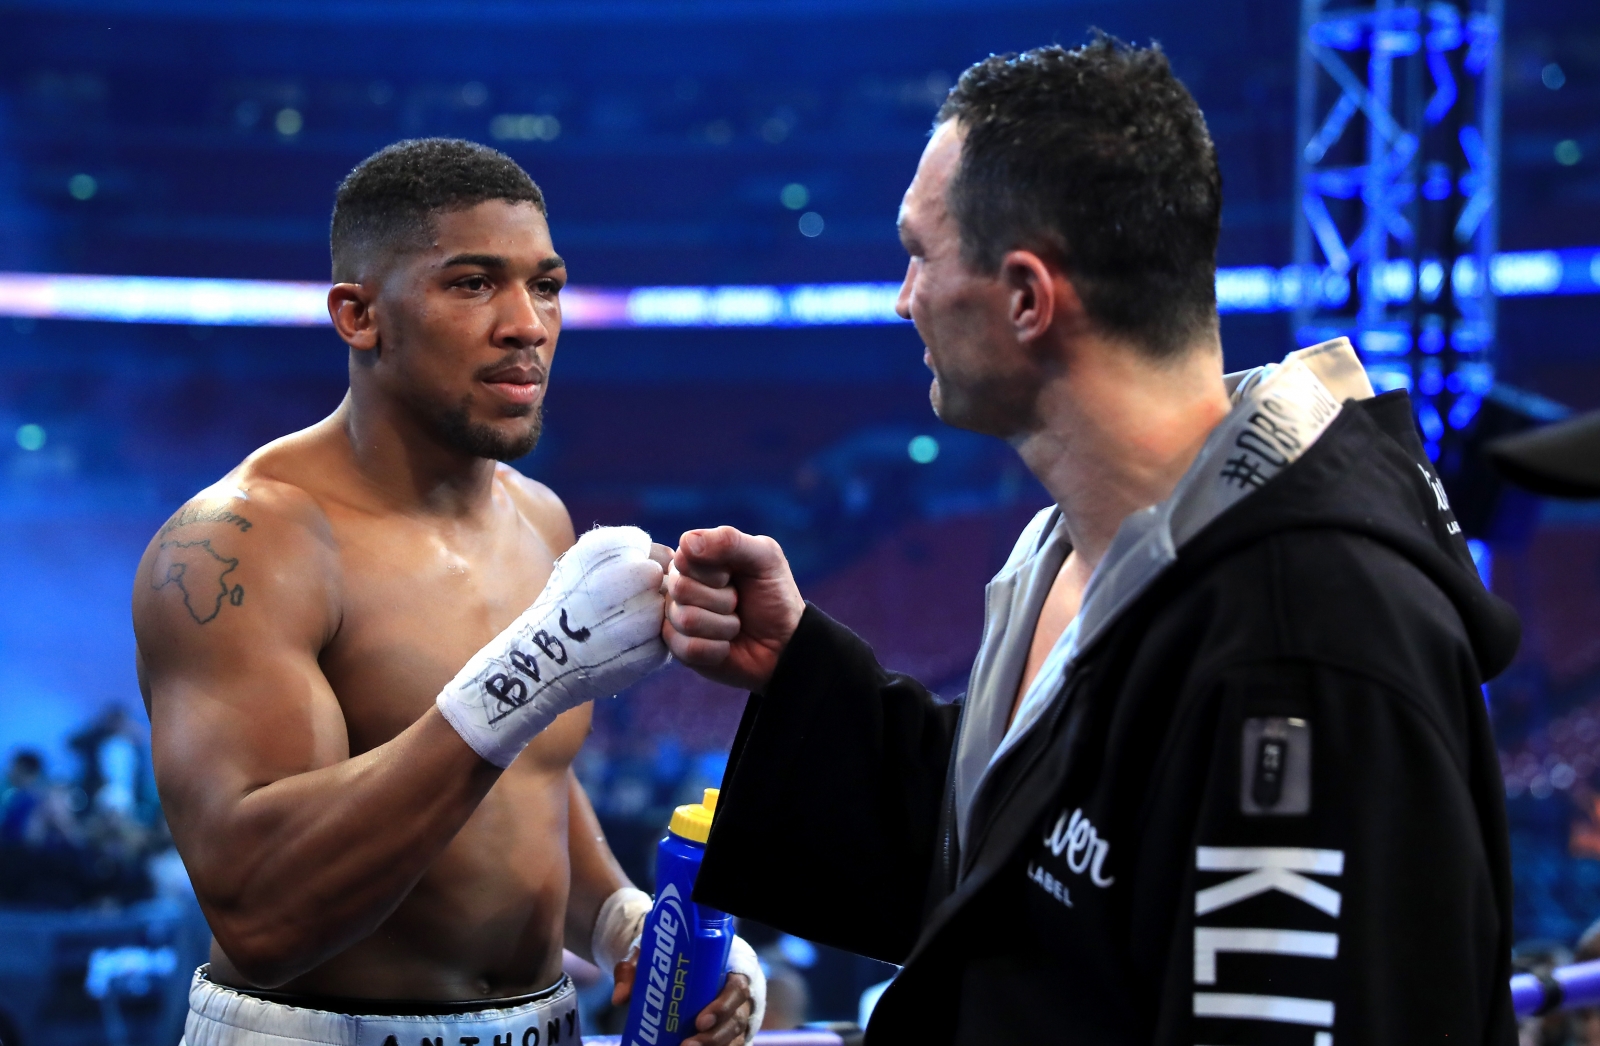 Anthony Joshua vs Wladimir Klitschko rematch could be confirmed this week1600 x 1046